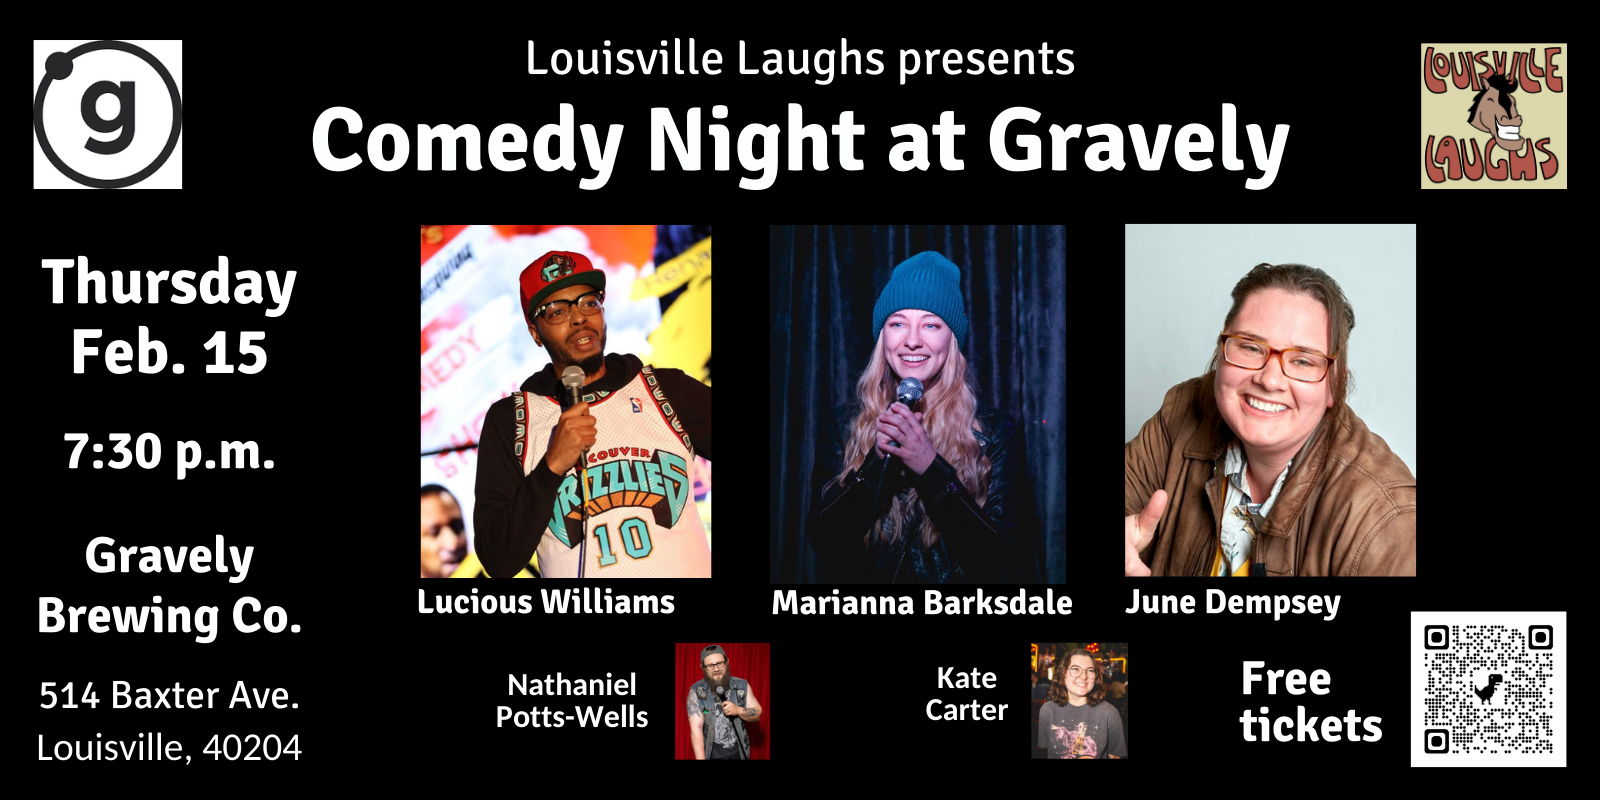 Feb. 15 Comedy Night at Gravely promotional image